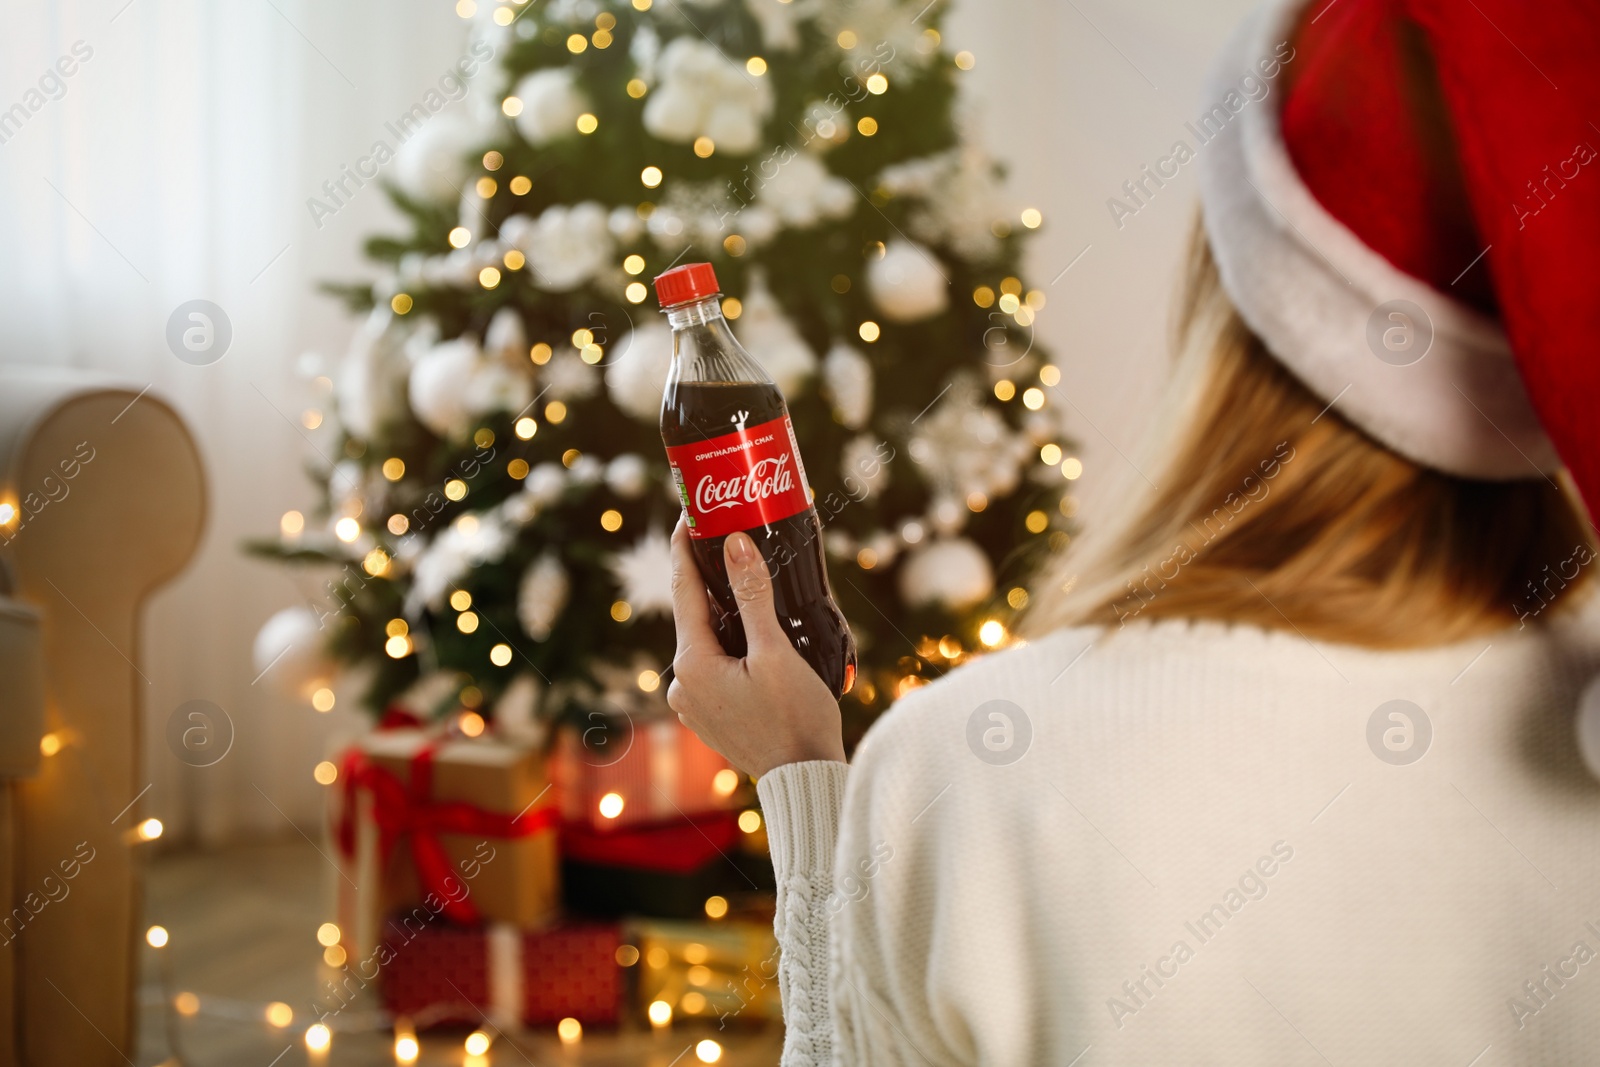 Photo of MYKOLAIV, UKRAINE - January 01, 2021: Woman in Santa hat with bottle of Coca-Cola against blurred Christmas tree at home, back view